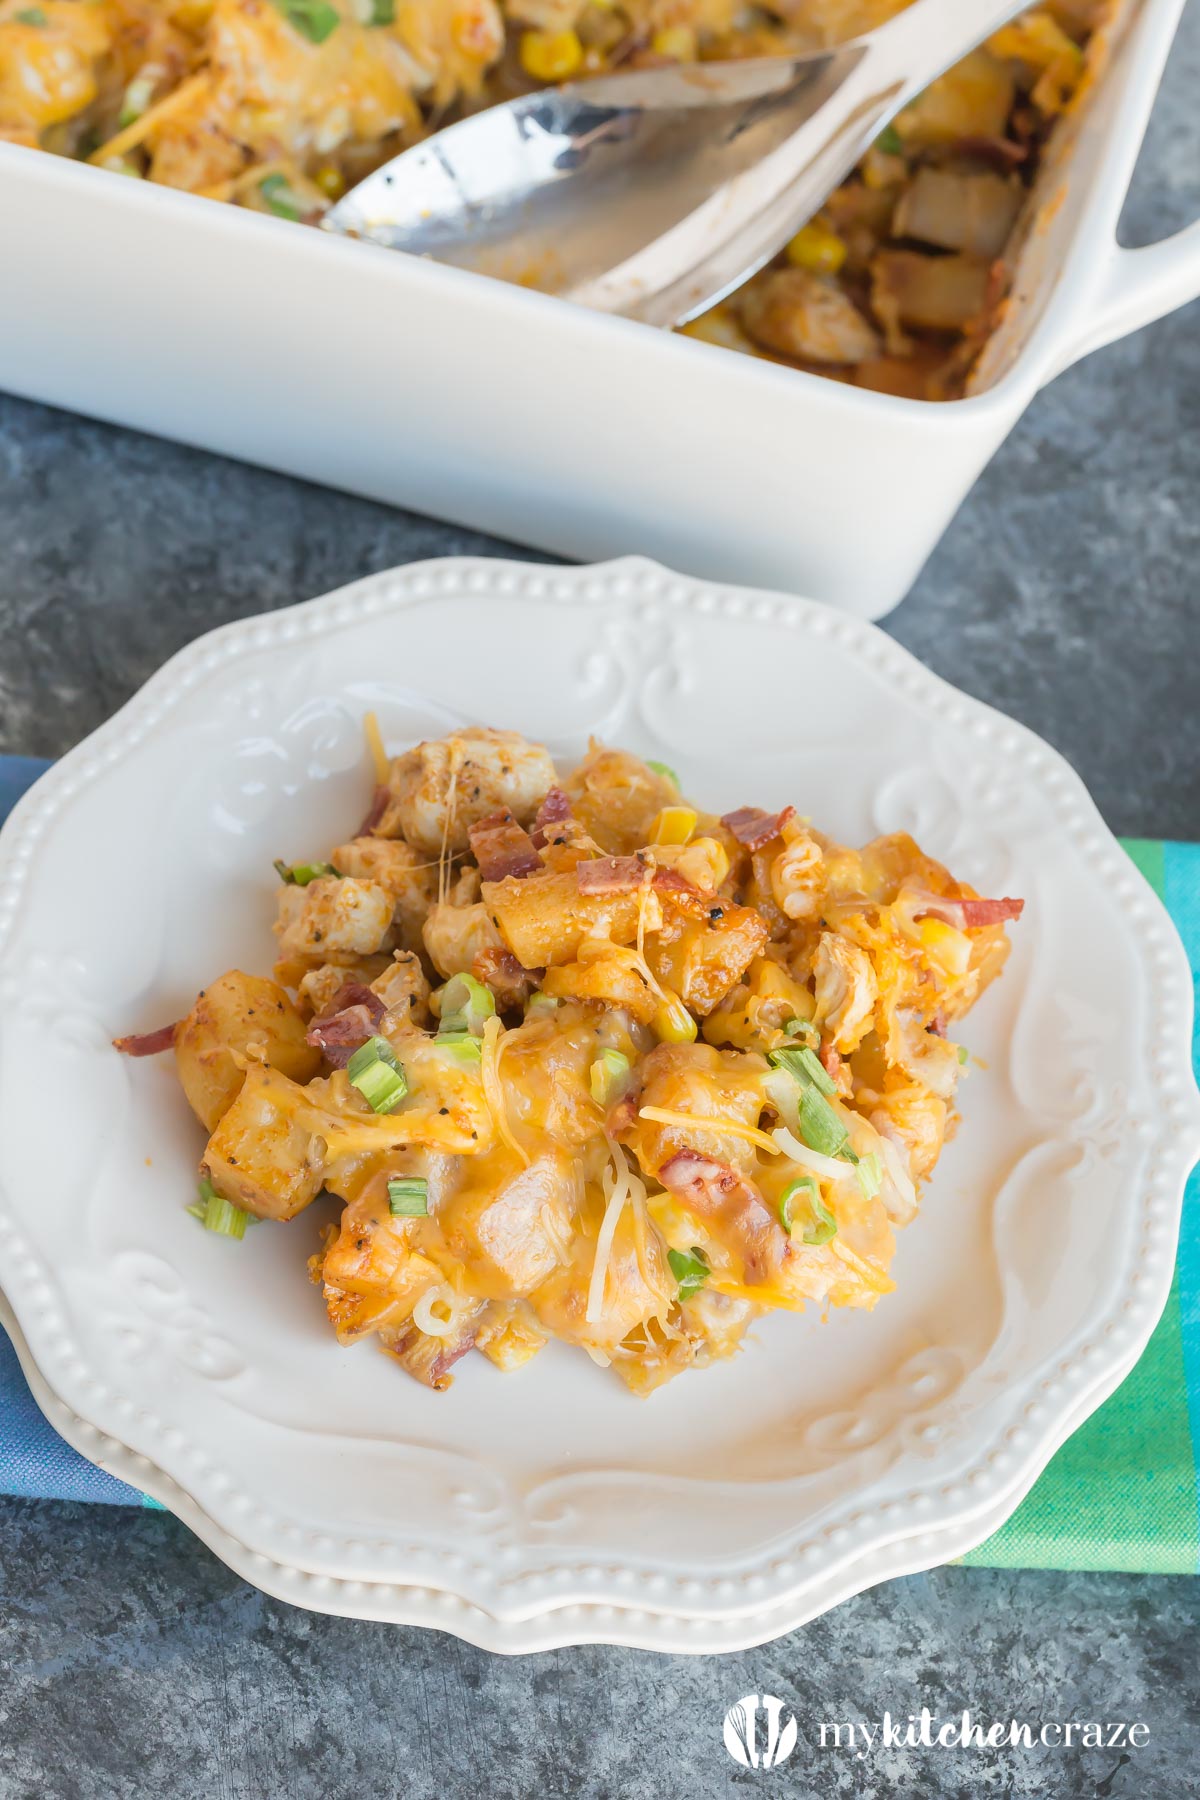 This flavorful Buffalo & Chicken Potato Casserole comes together easily and is always a family favorite dinner recipe!